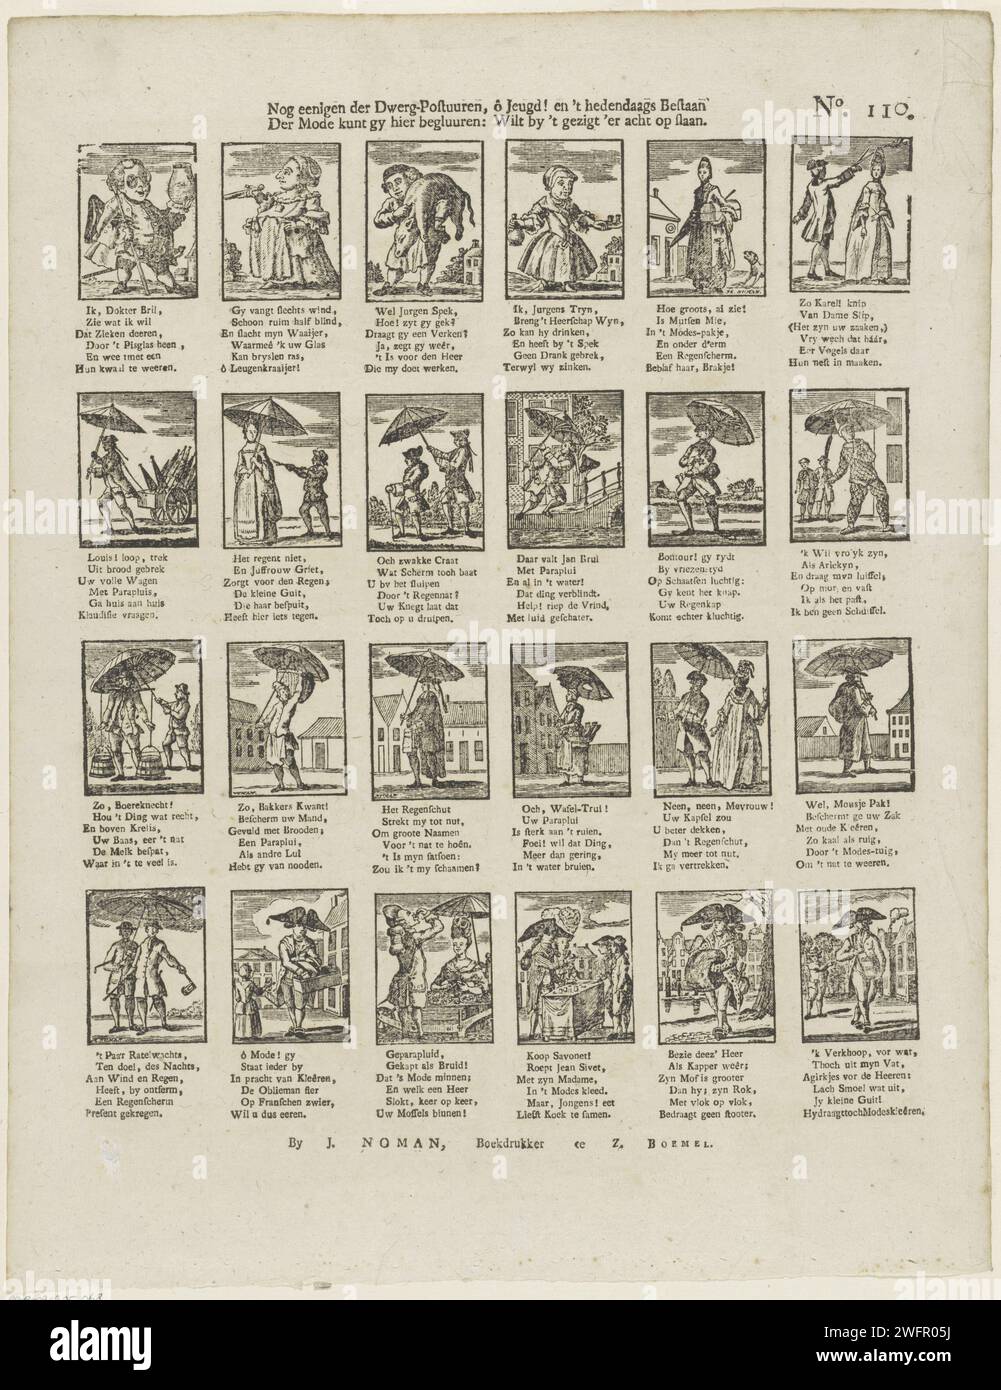 Some of the dwarf post hours, ô Youth! and the contemporary existence / Der Fashion you can see here: Want by 't Gezigt' eight, 1806 - 1830 print Cartoon on fashion with 24 performances of a men, women and caricature figures with parasols. A six -line verse under each image. Numbered at the top right: No. 110. Publisher: Zaltbommelprint Maker: Netherlands paper letterpress printing fashion. fashion, clothing. parasol, sunshade. caricatures (human types). comedy Stock Photo